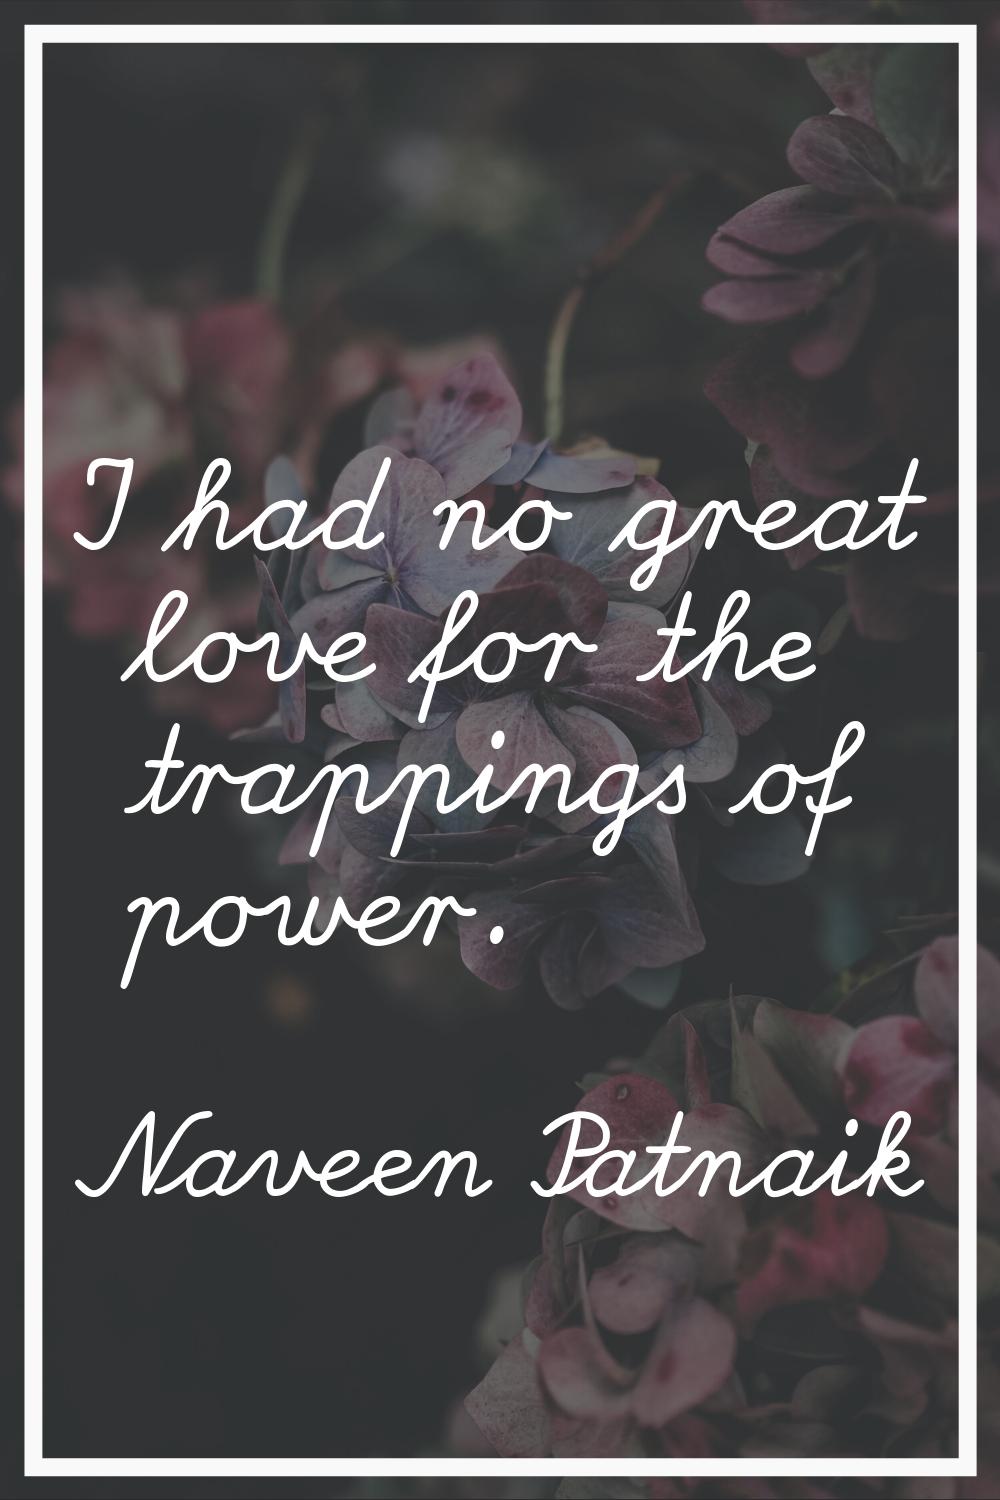 I had no great love for the trappings of power.